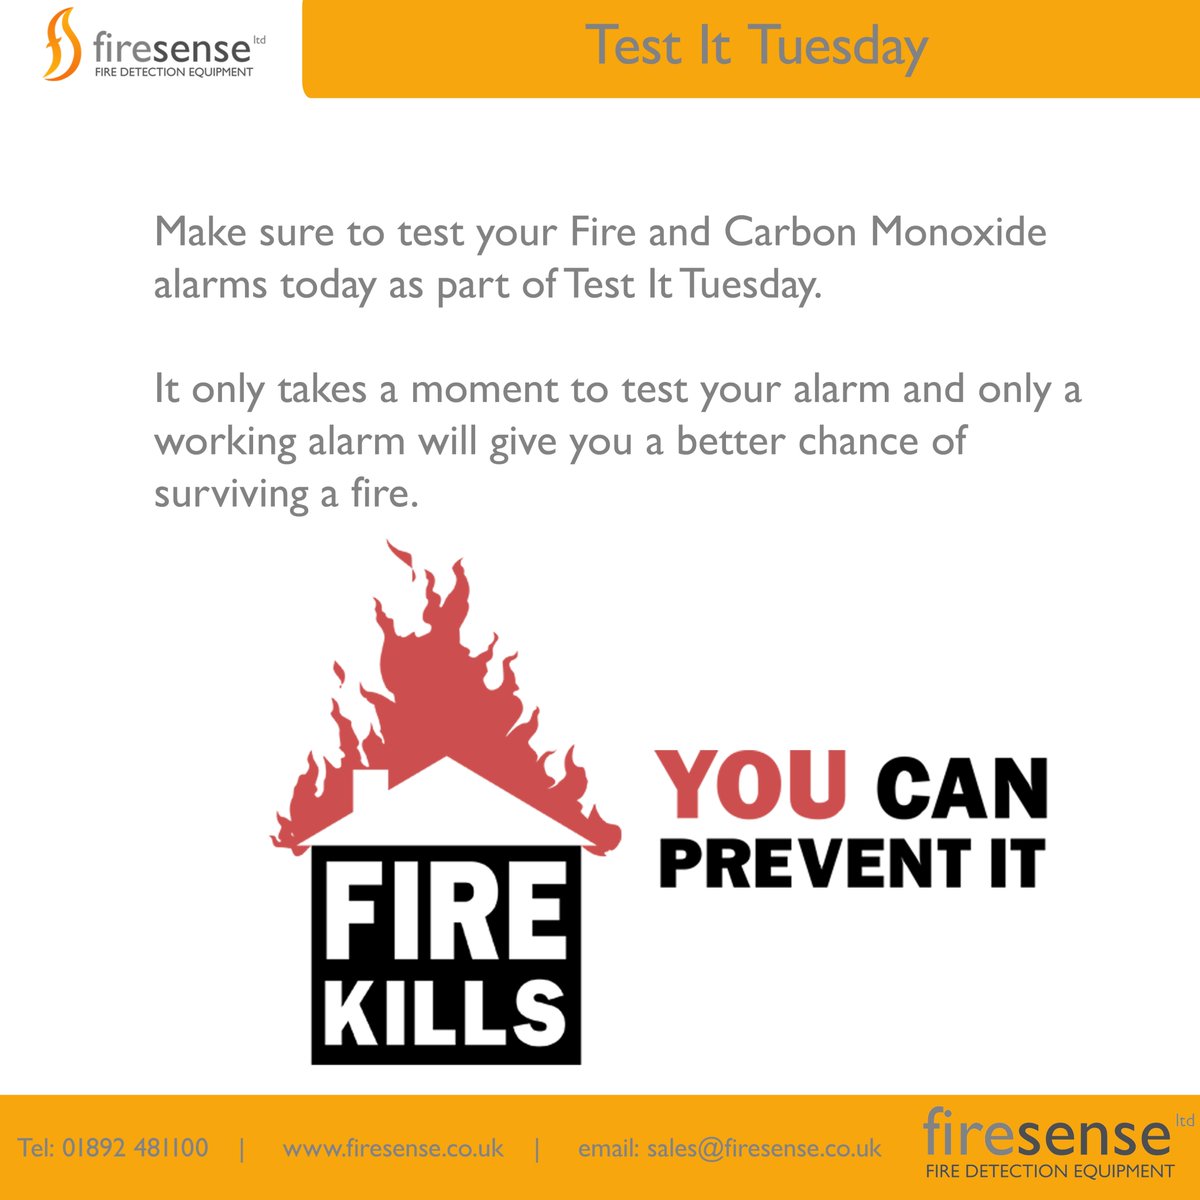 Make sure to test your smoke and CO alarm today as part of Test It Tuesday.

Only a working alarm can help save a life.

#fire #firekills #firesafety #firealarm #smokealarm #coalarm #presstotest #testyouralarm #testittuesday #test